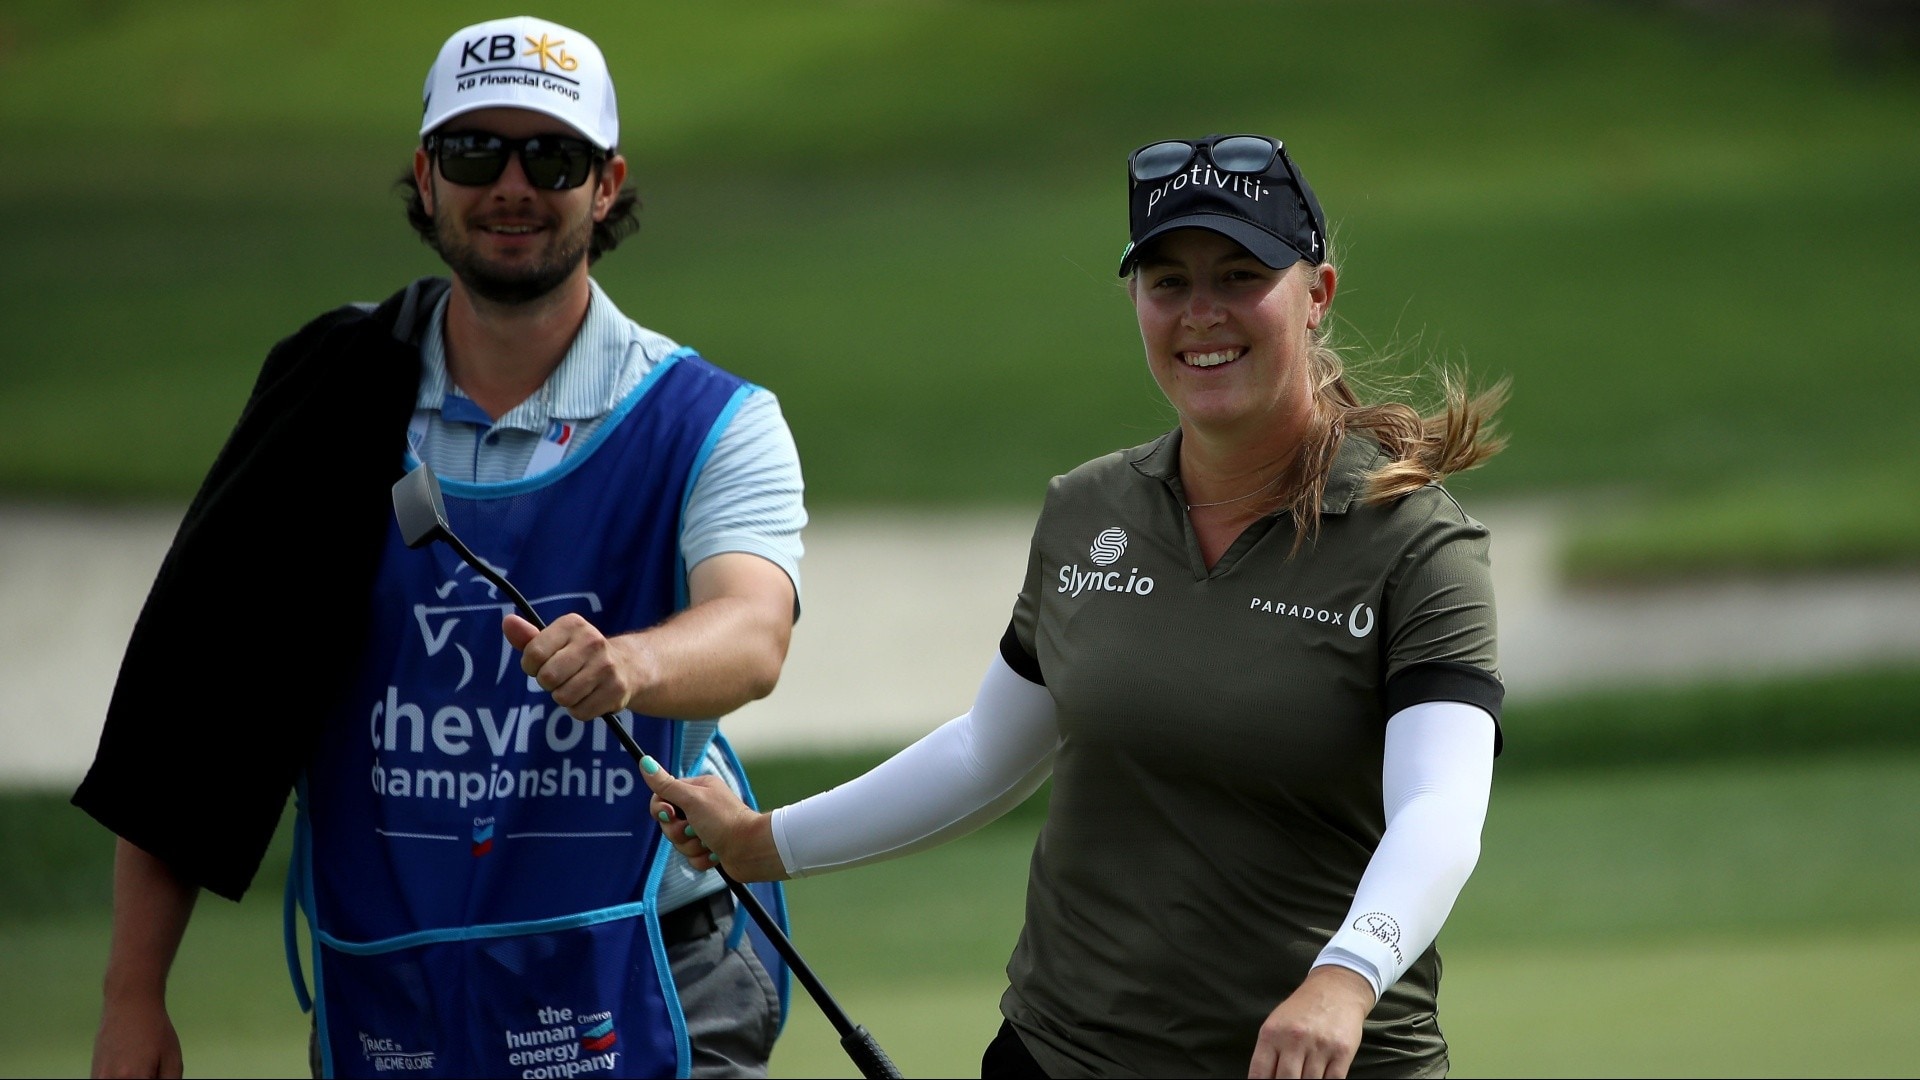 How to watch: Live streams for 2023 Chevron Championship, Zurich Classic of New Orleans